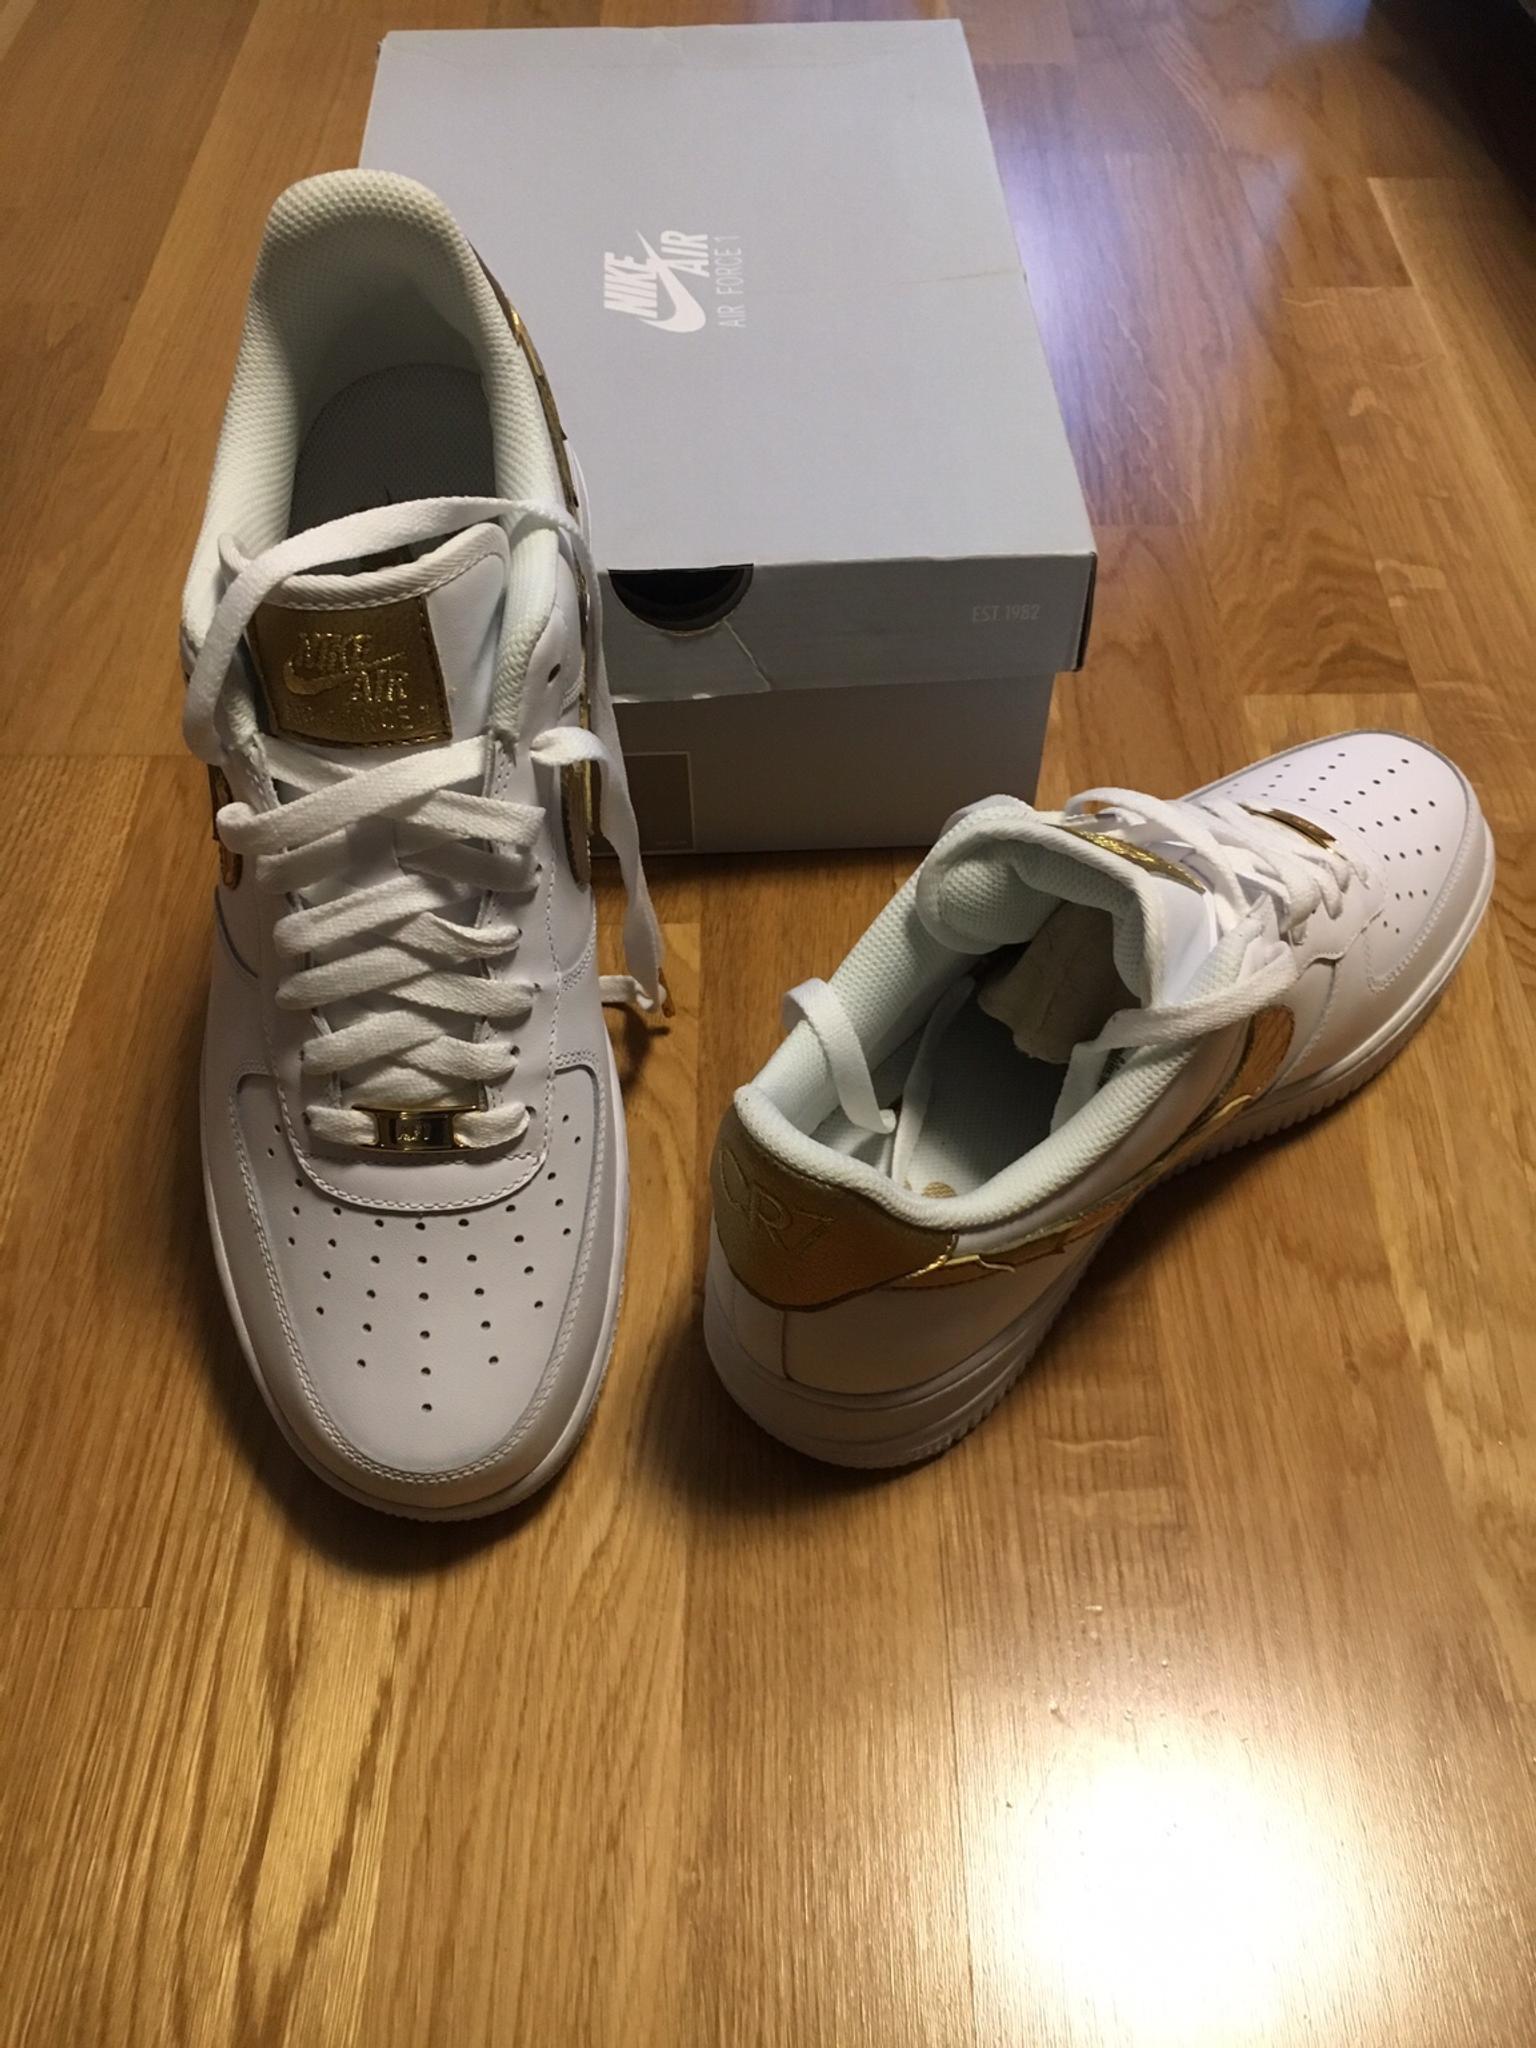 Nike Air Force 1 07 CR7 (NEU 44,5) in 81249 München for €299.00 for sale |  Shpock